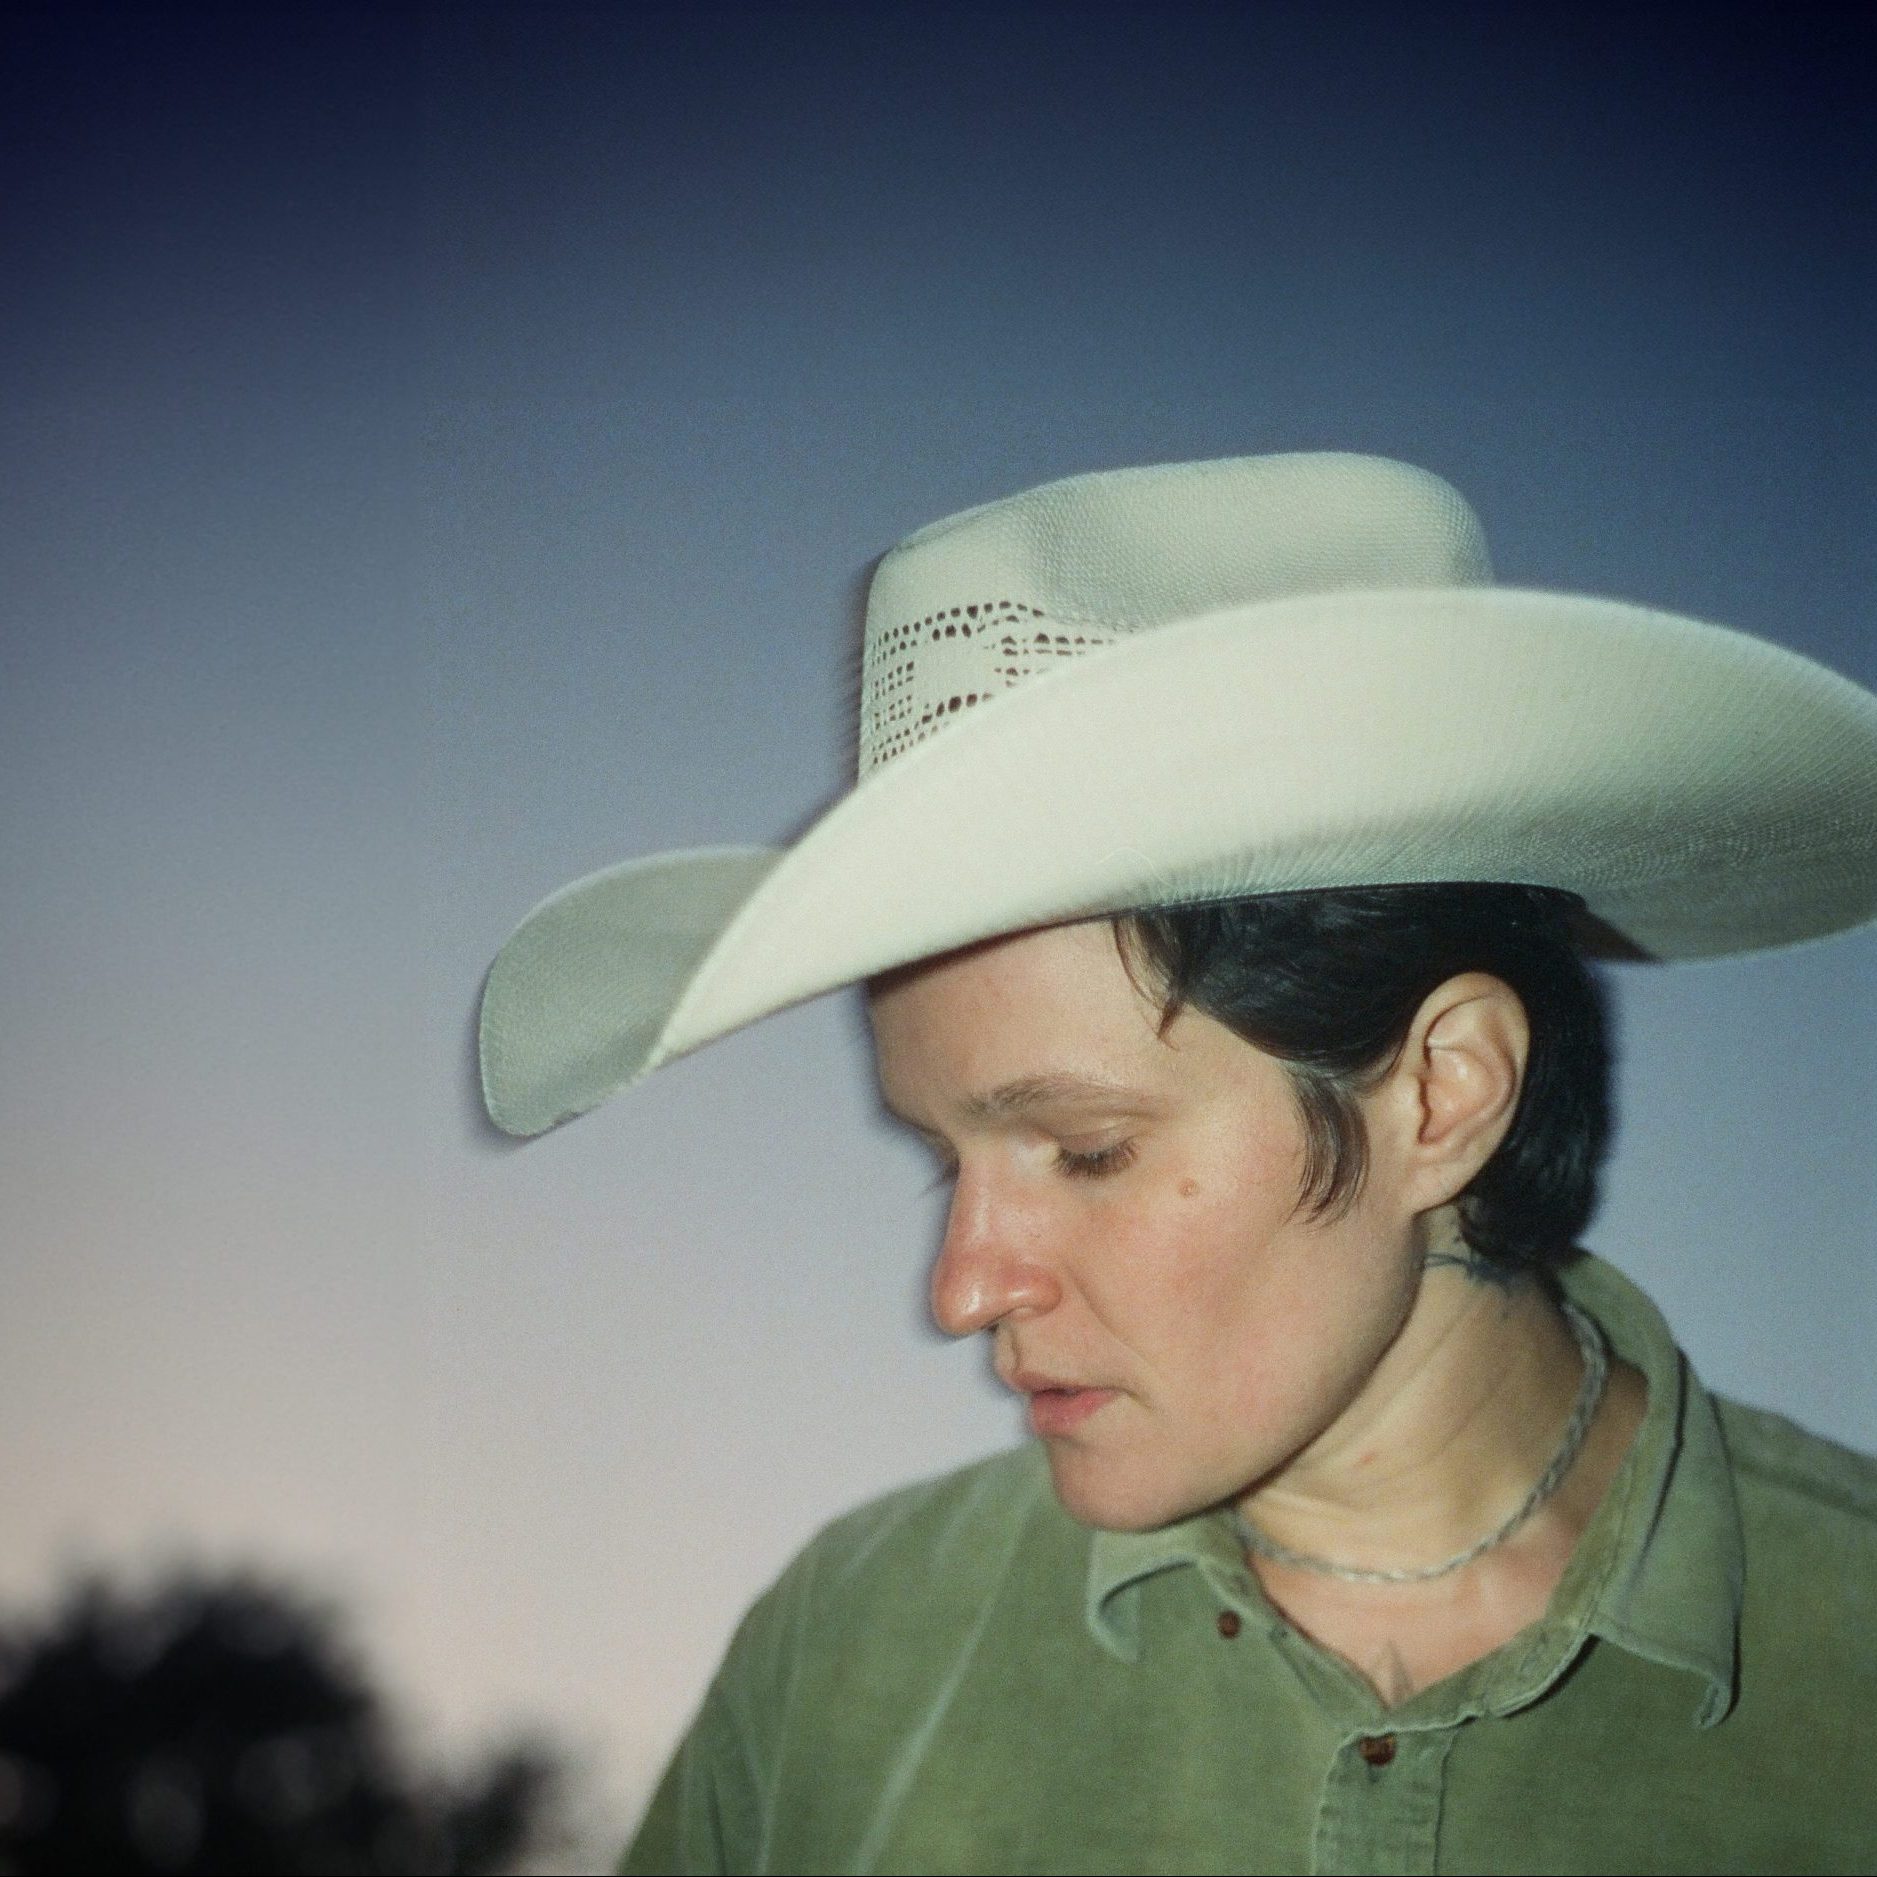 Person with short hair wearing green shirt and cowboy hat against a melancholy sunset.